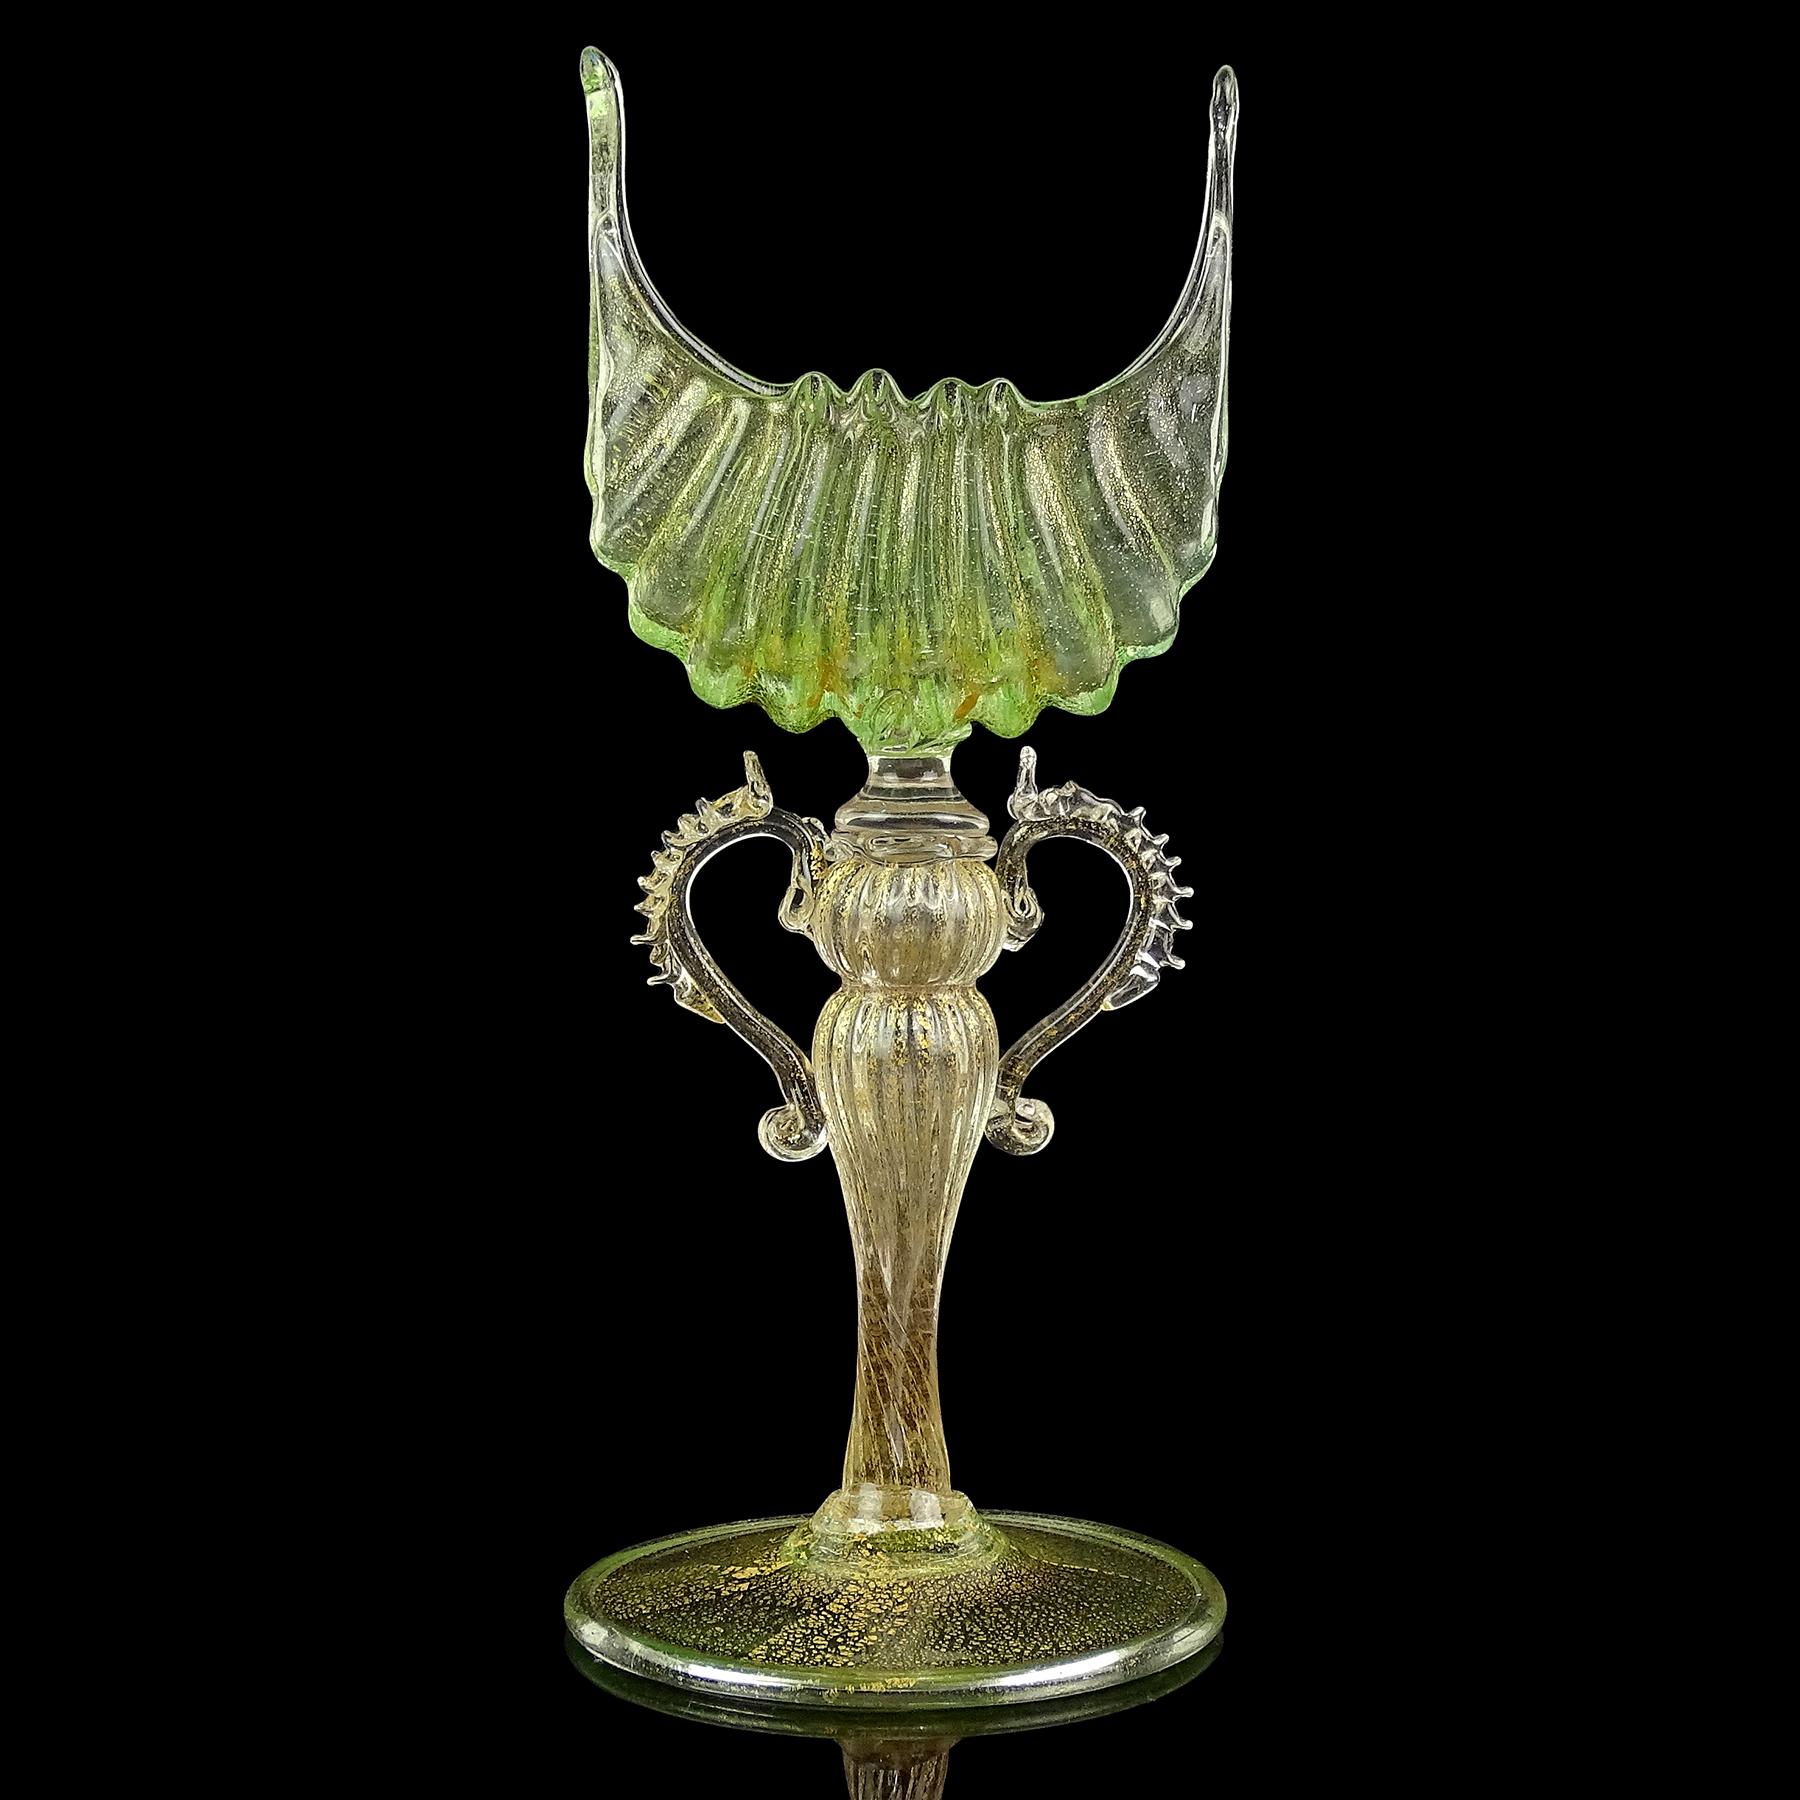 Beautiful, antique, early Venetian / Murano hand blown green and gold flecks Italian art glass seashell decoration decorative table object / card holder / goblet. Documented to the Salviati company, circa 1890-1900. The stem of the piece is made in